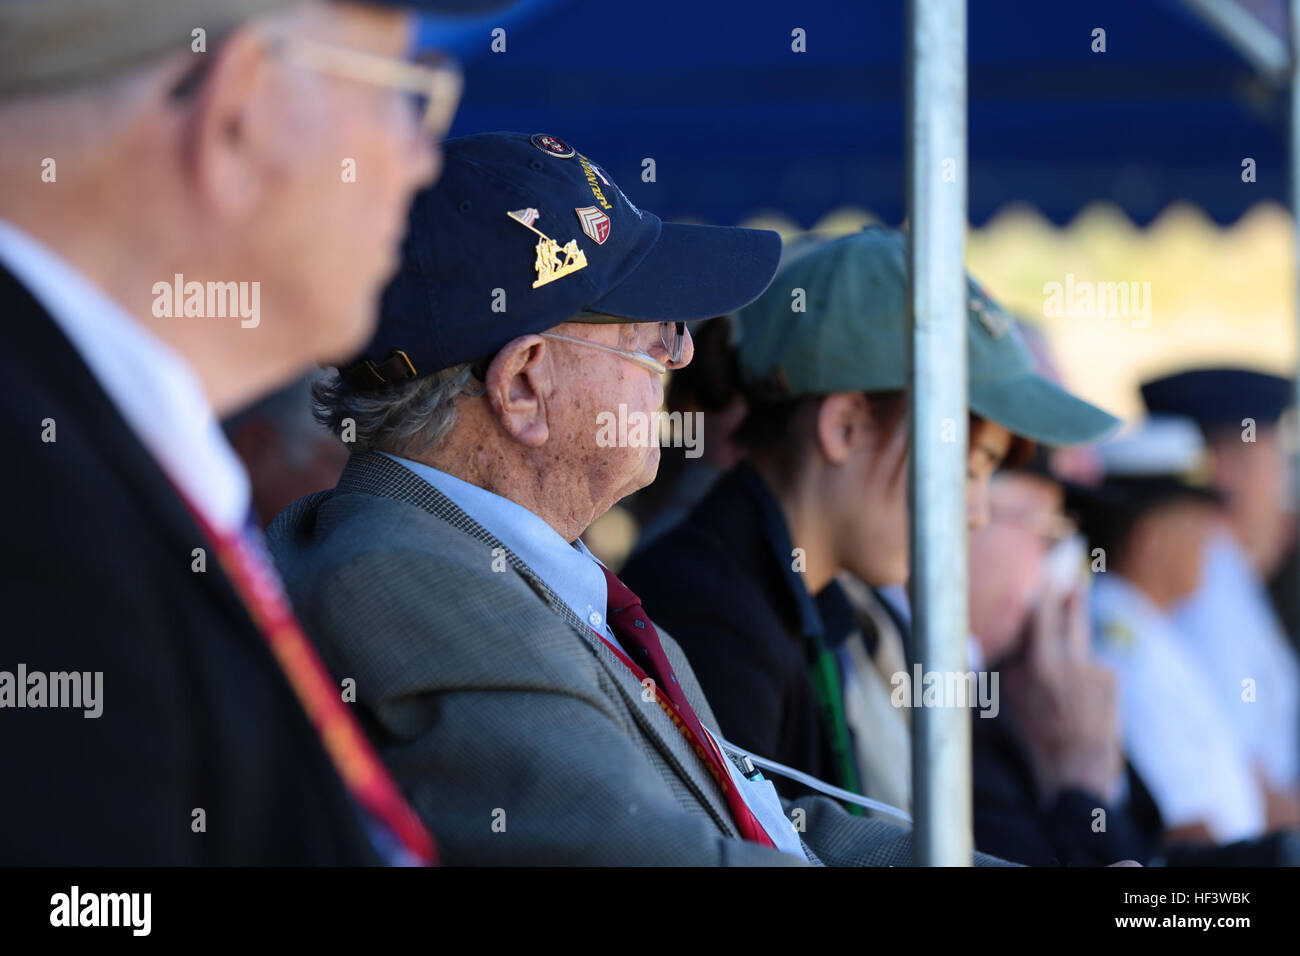 U.S. Marine Corps veterans of Iwo Jima, Gene Bell, left, and Abraham Eutsey, center, attend the 71st Commemoration of the Battle of Iwo Jima at Iwo To, Japan, March 19, 2016. The Iwo Jima Reunion of Honor is an opportunity for Japanese and U.S. veterans and their families, dignitaries, leaders and service members from both nations to honor the battle while recognizing 71 years of peace and prosperity in the U.S. – Japanese alliance. (U.S. Marine Corps photo by MCIPAC Combat Camera Lance Cpl. Juan Esqueda / Released) Iwo Jima 71st Reunion of Honor 160319-M-JD520-138 Stock Photo